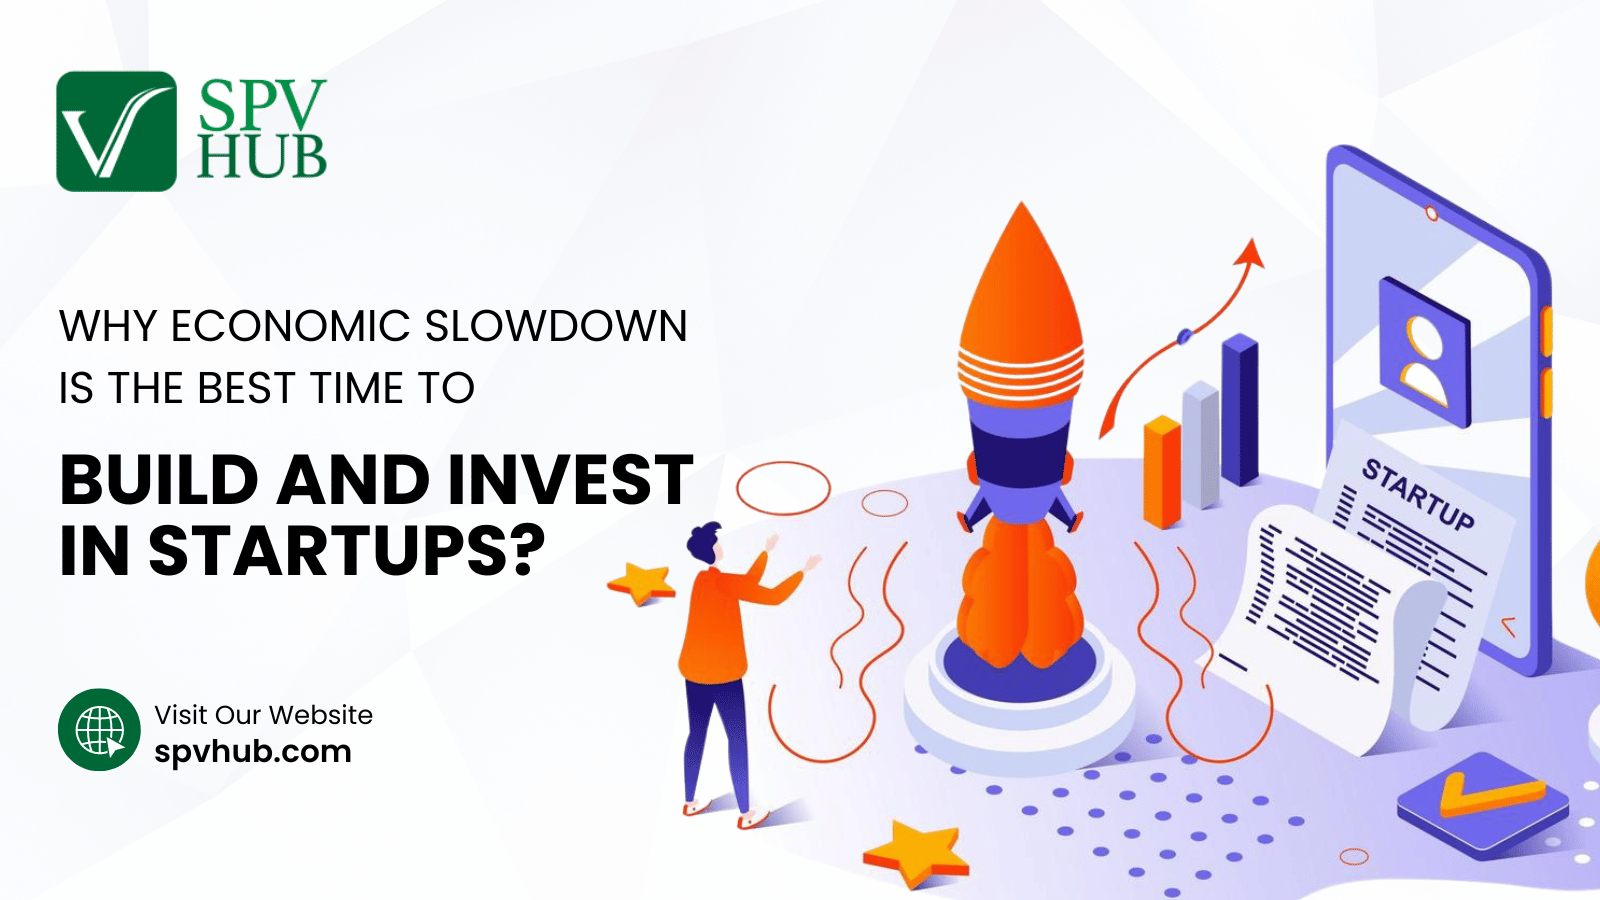 Why Economic Slowdown is The Best Time To Build And Invest In Startups?